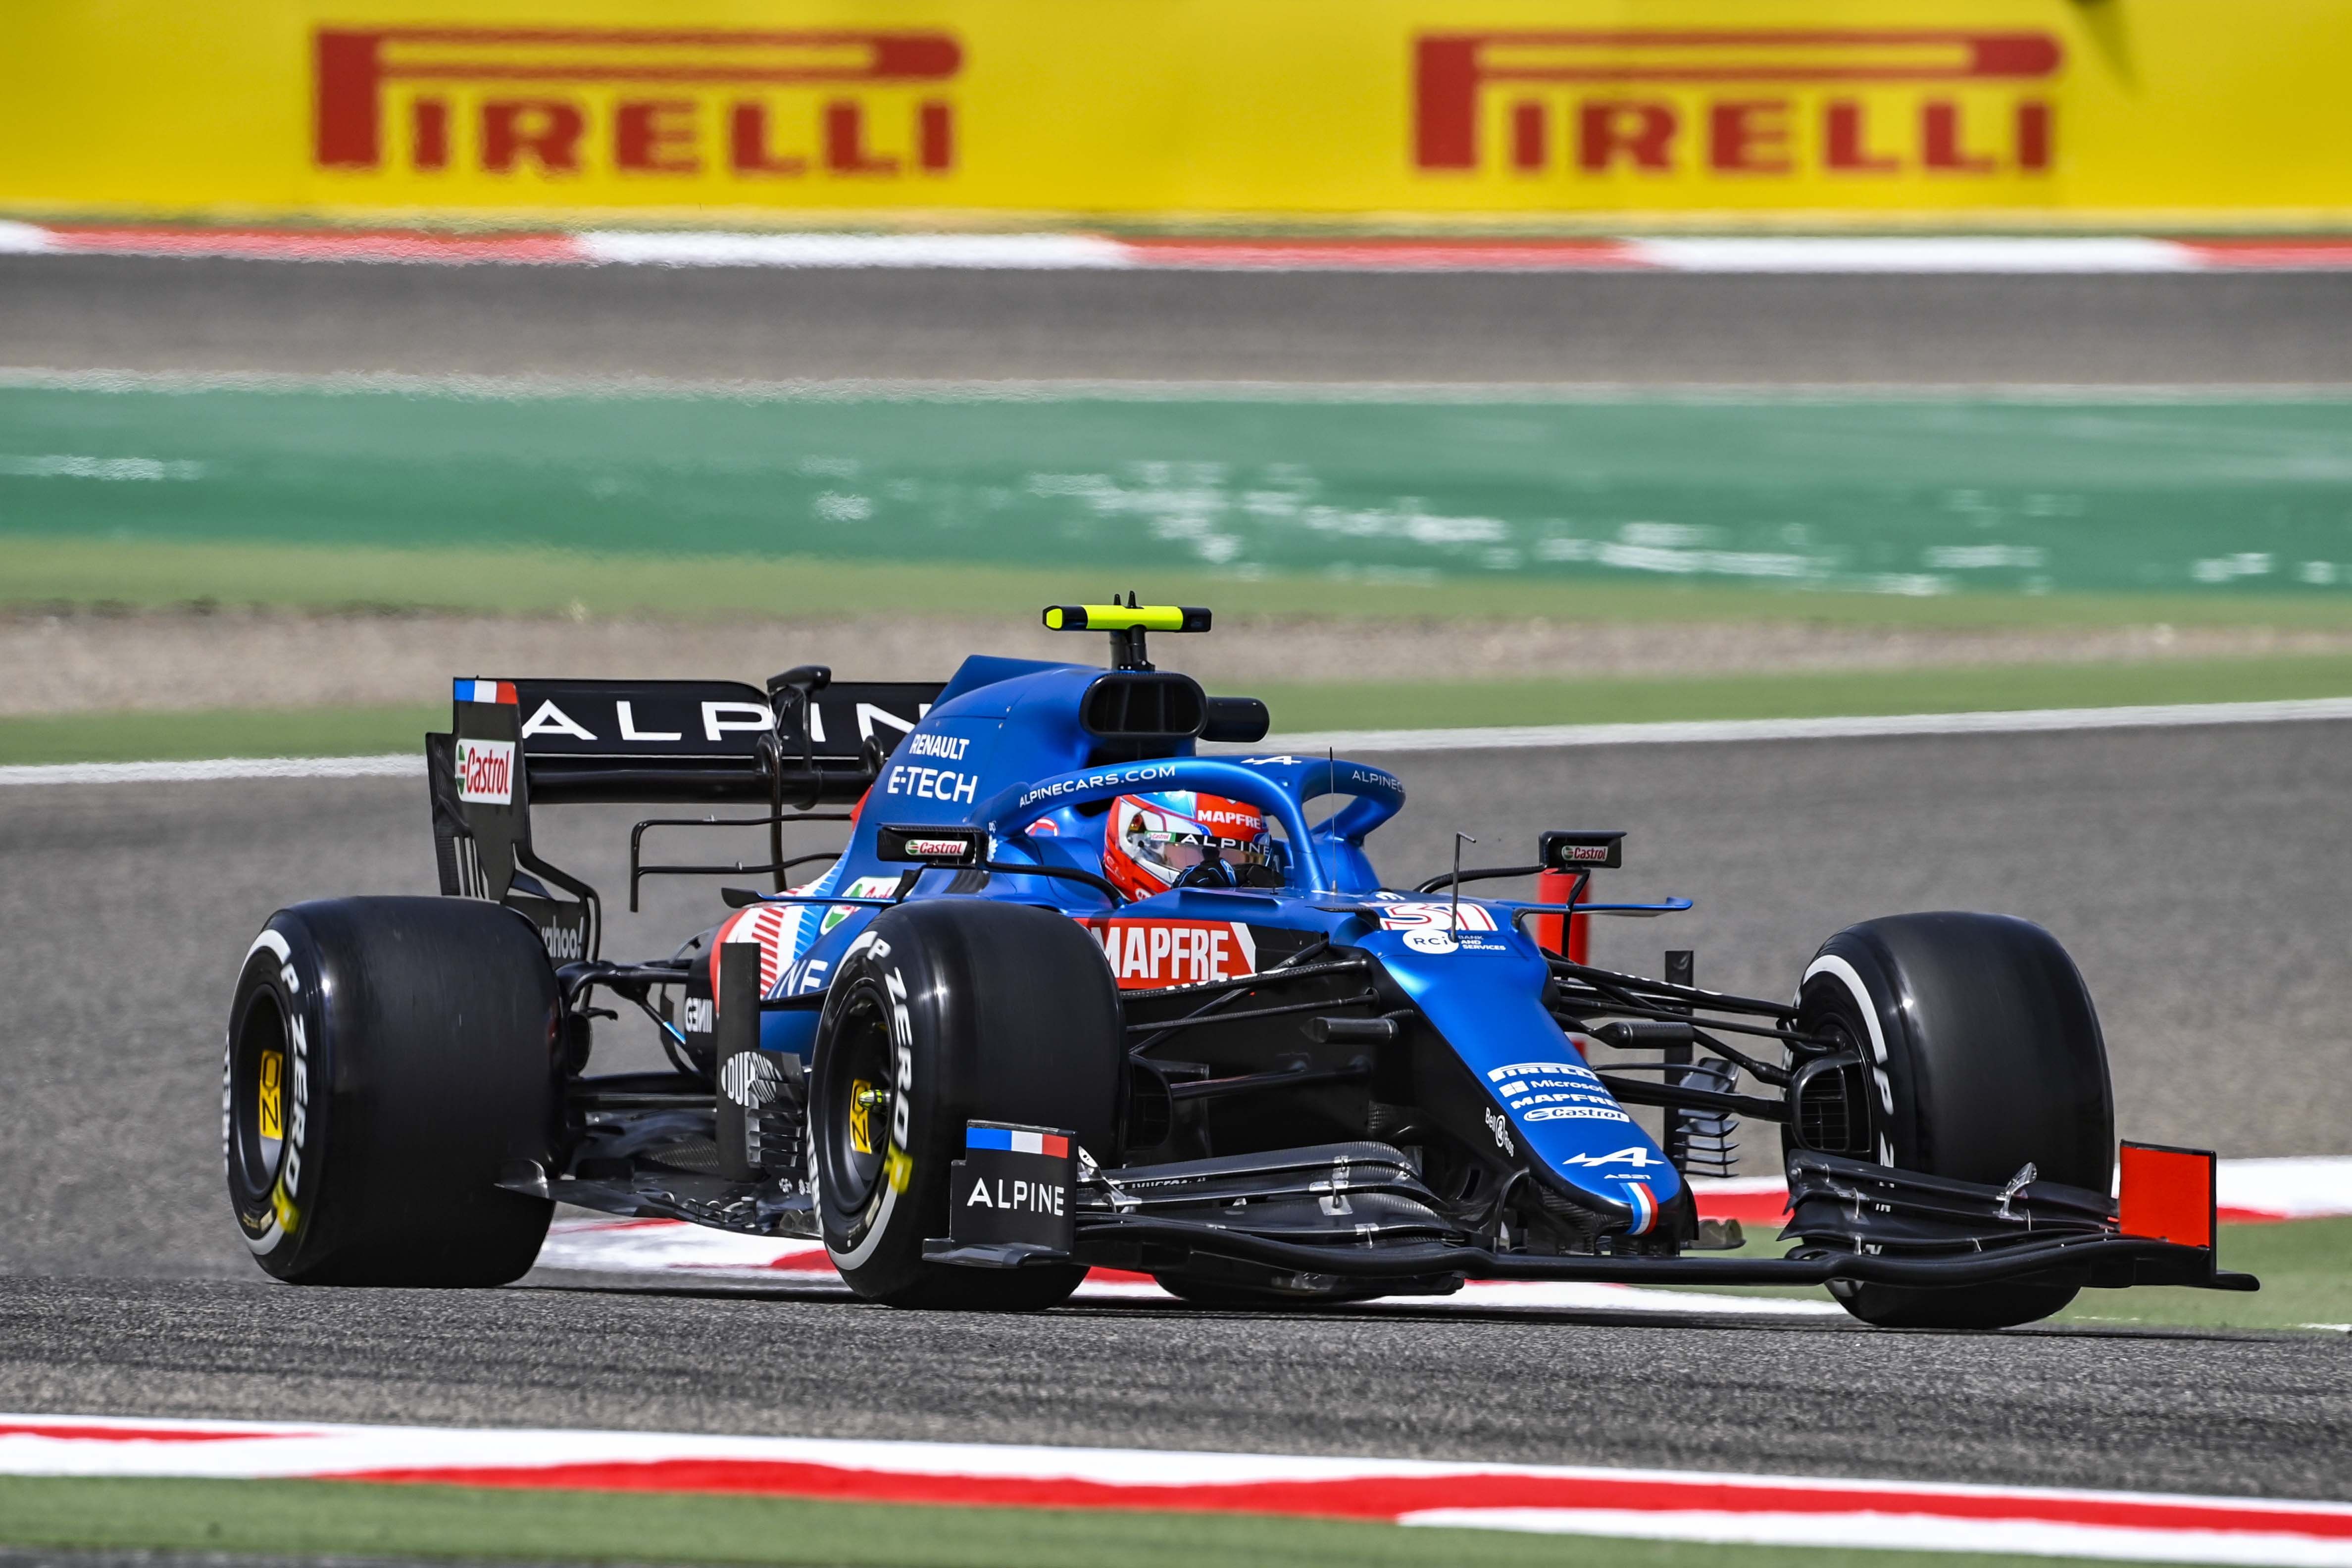 Alpine can't compare their Renault engine with a other team